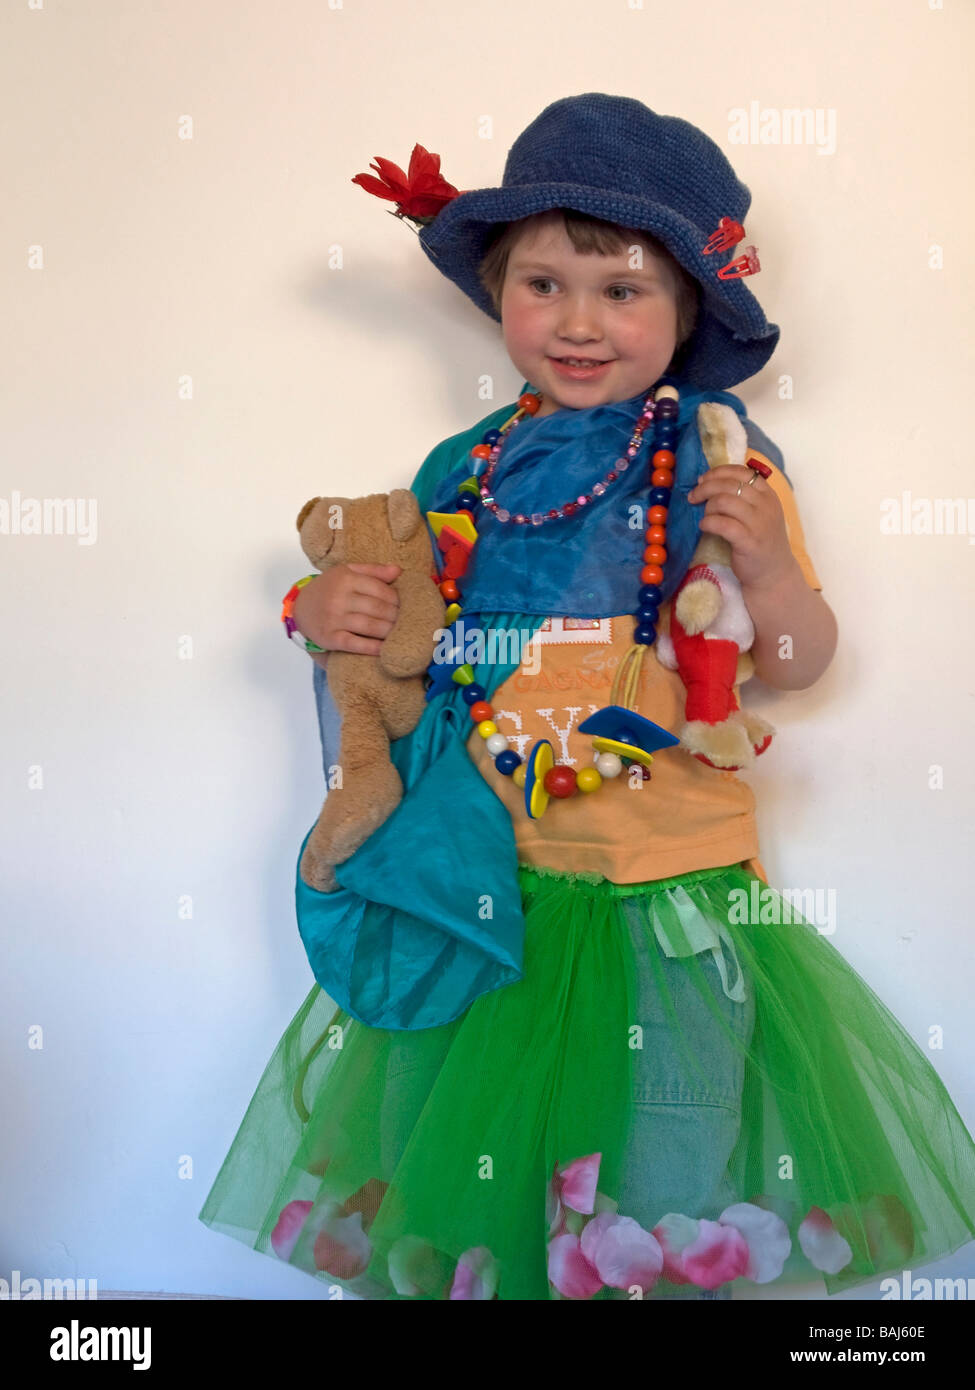 little girl 3 years old masquerading disguising itself as princess playing with teddy bear Stock Photo